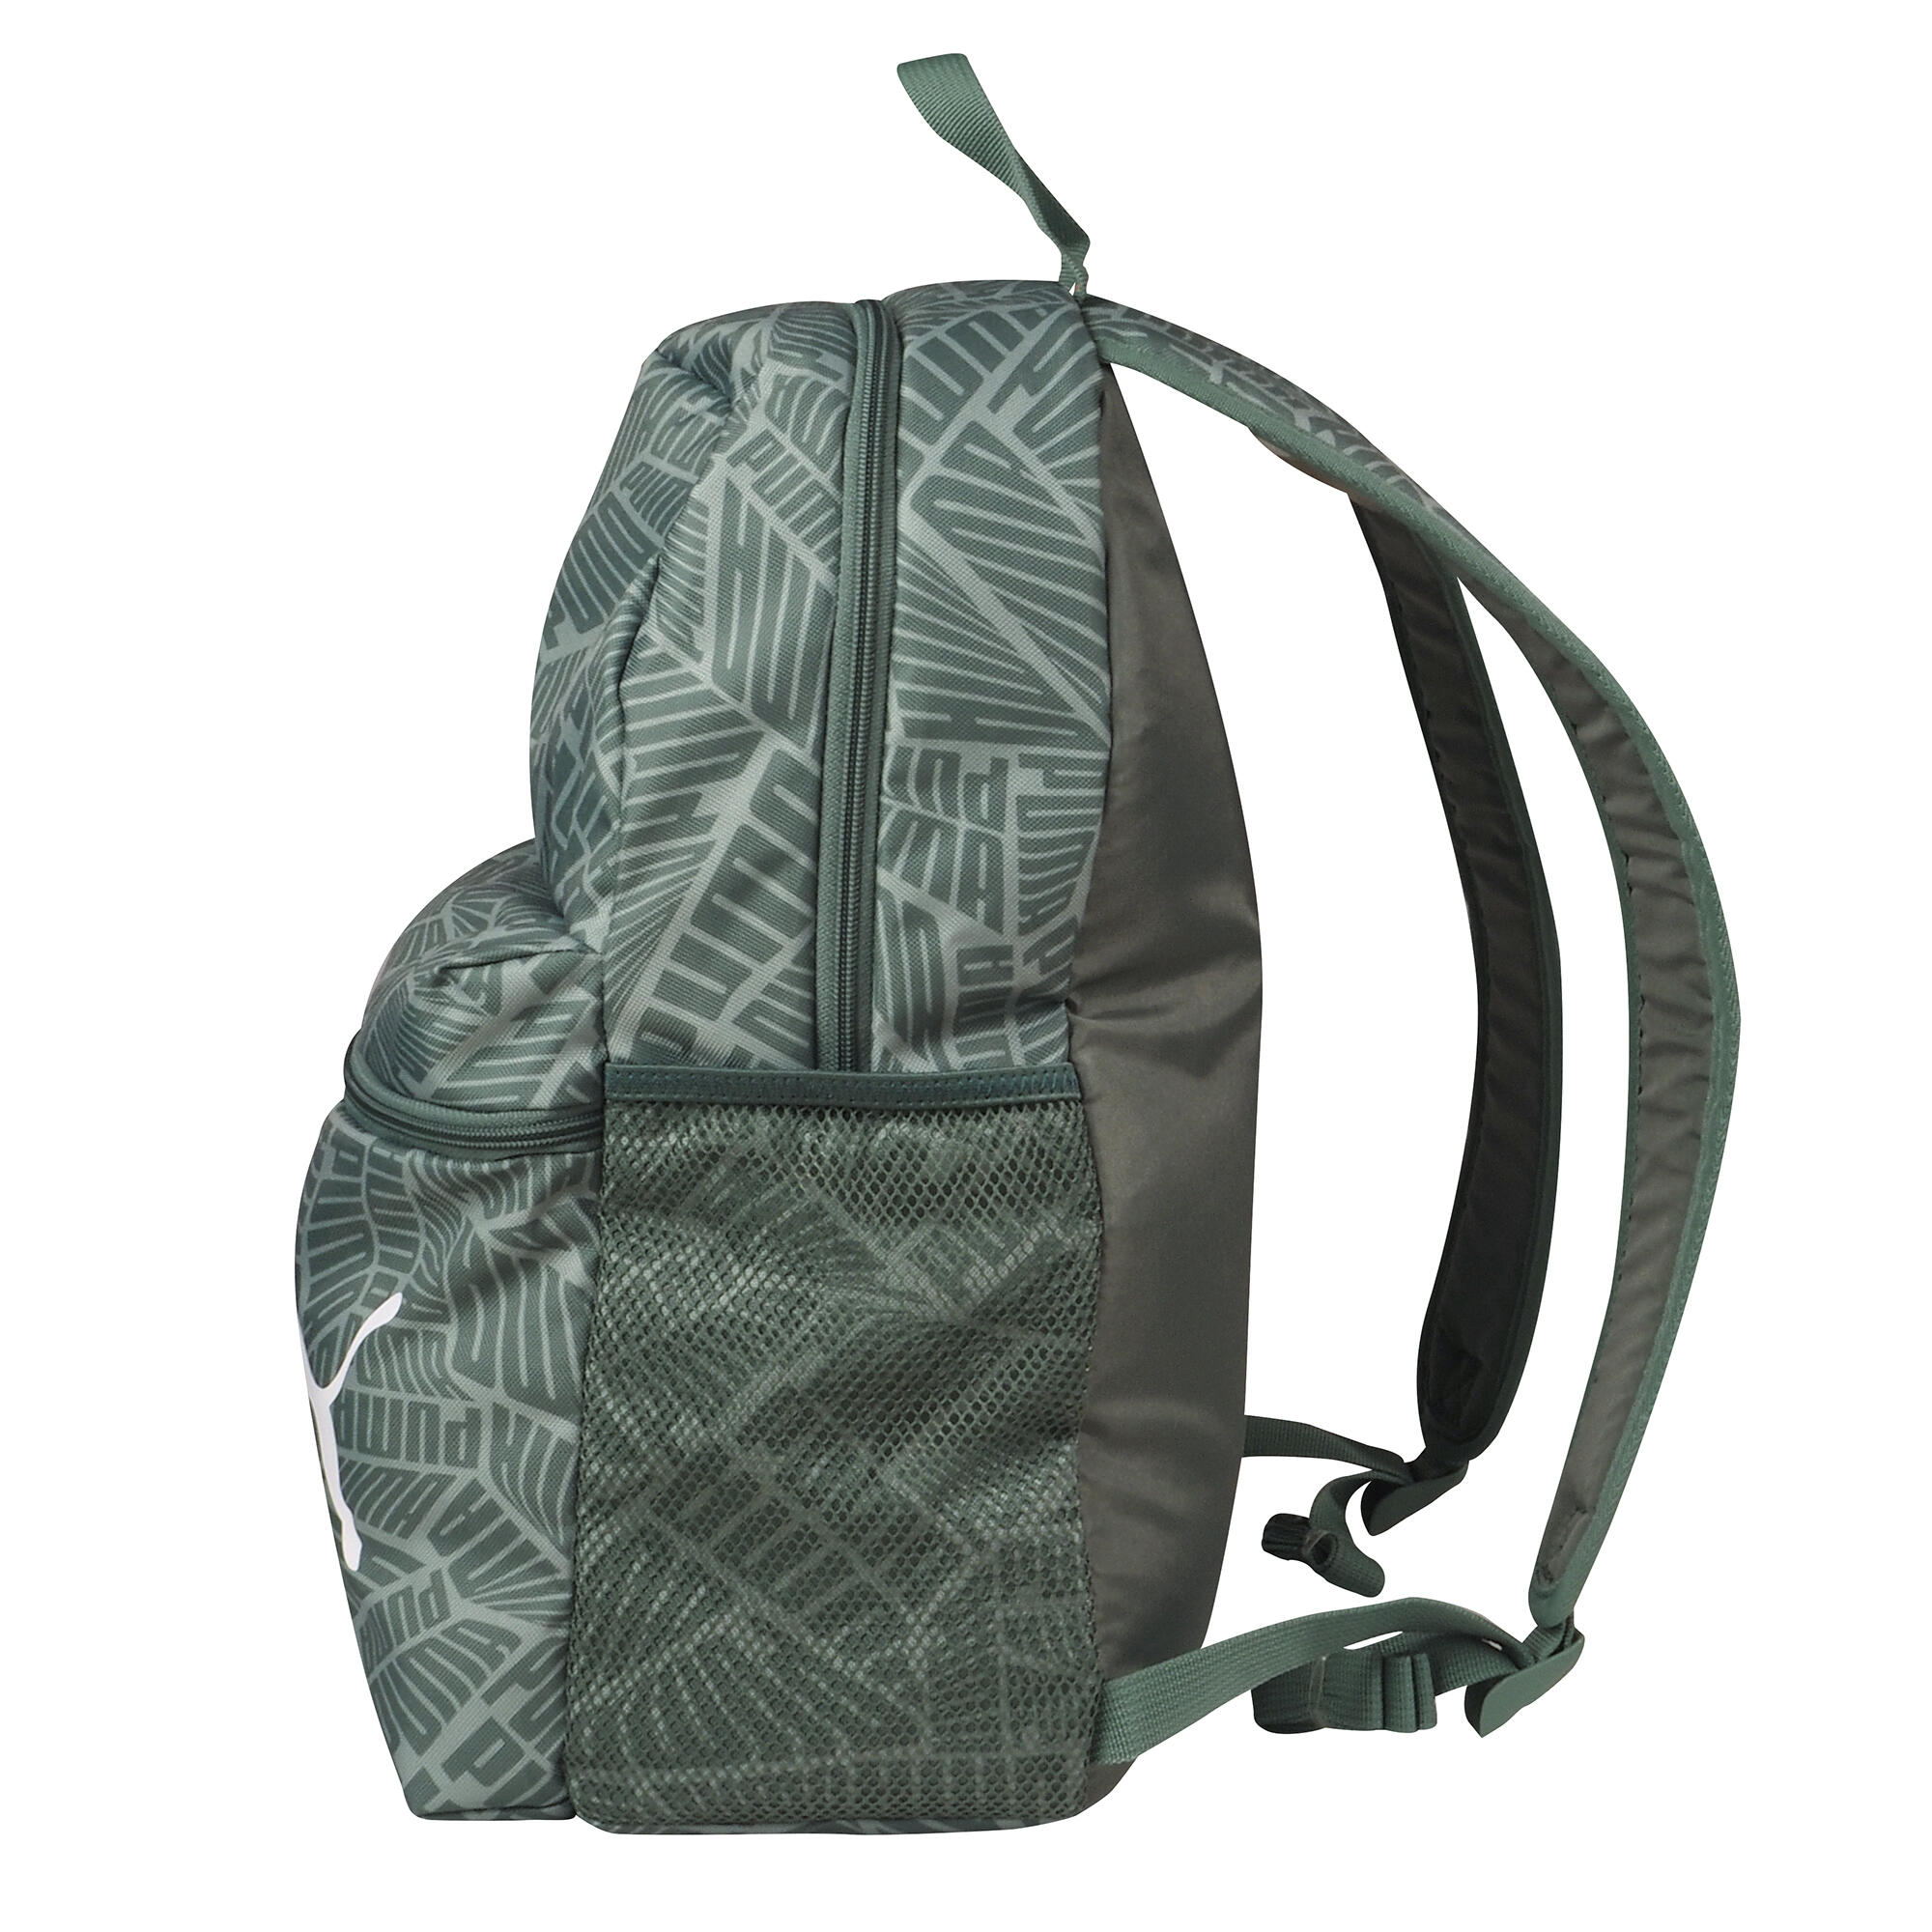 Backpack Phase - Green 4/7